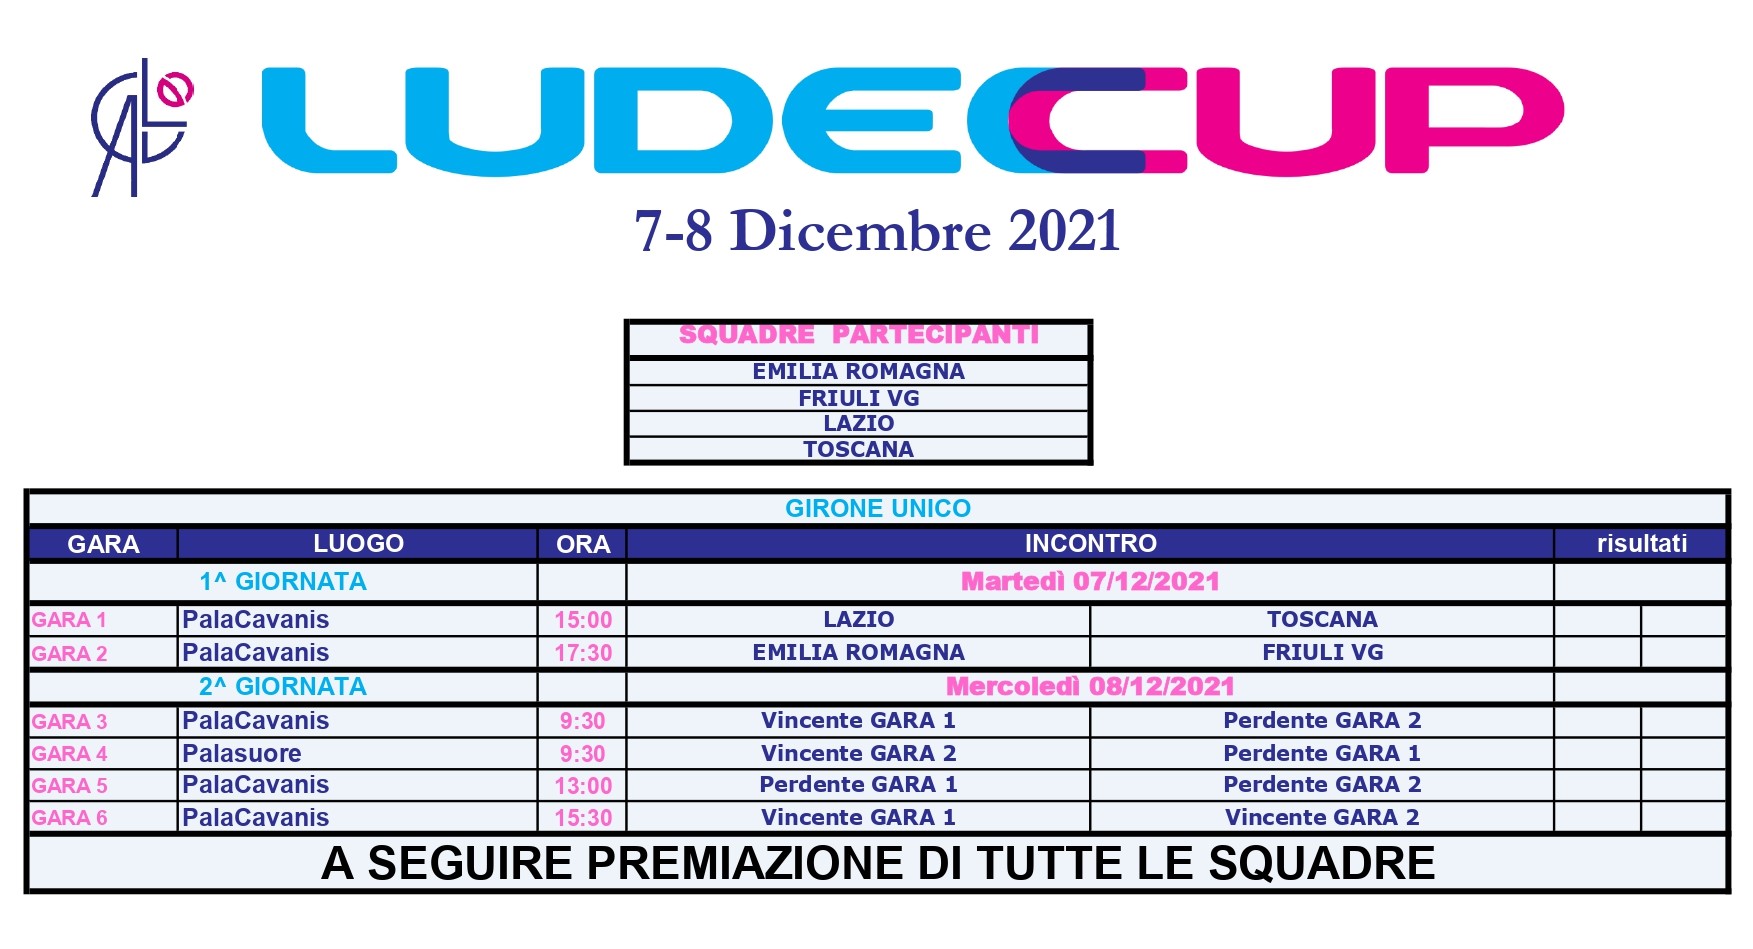 ludeccup 2021 img